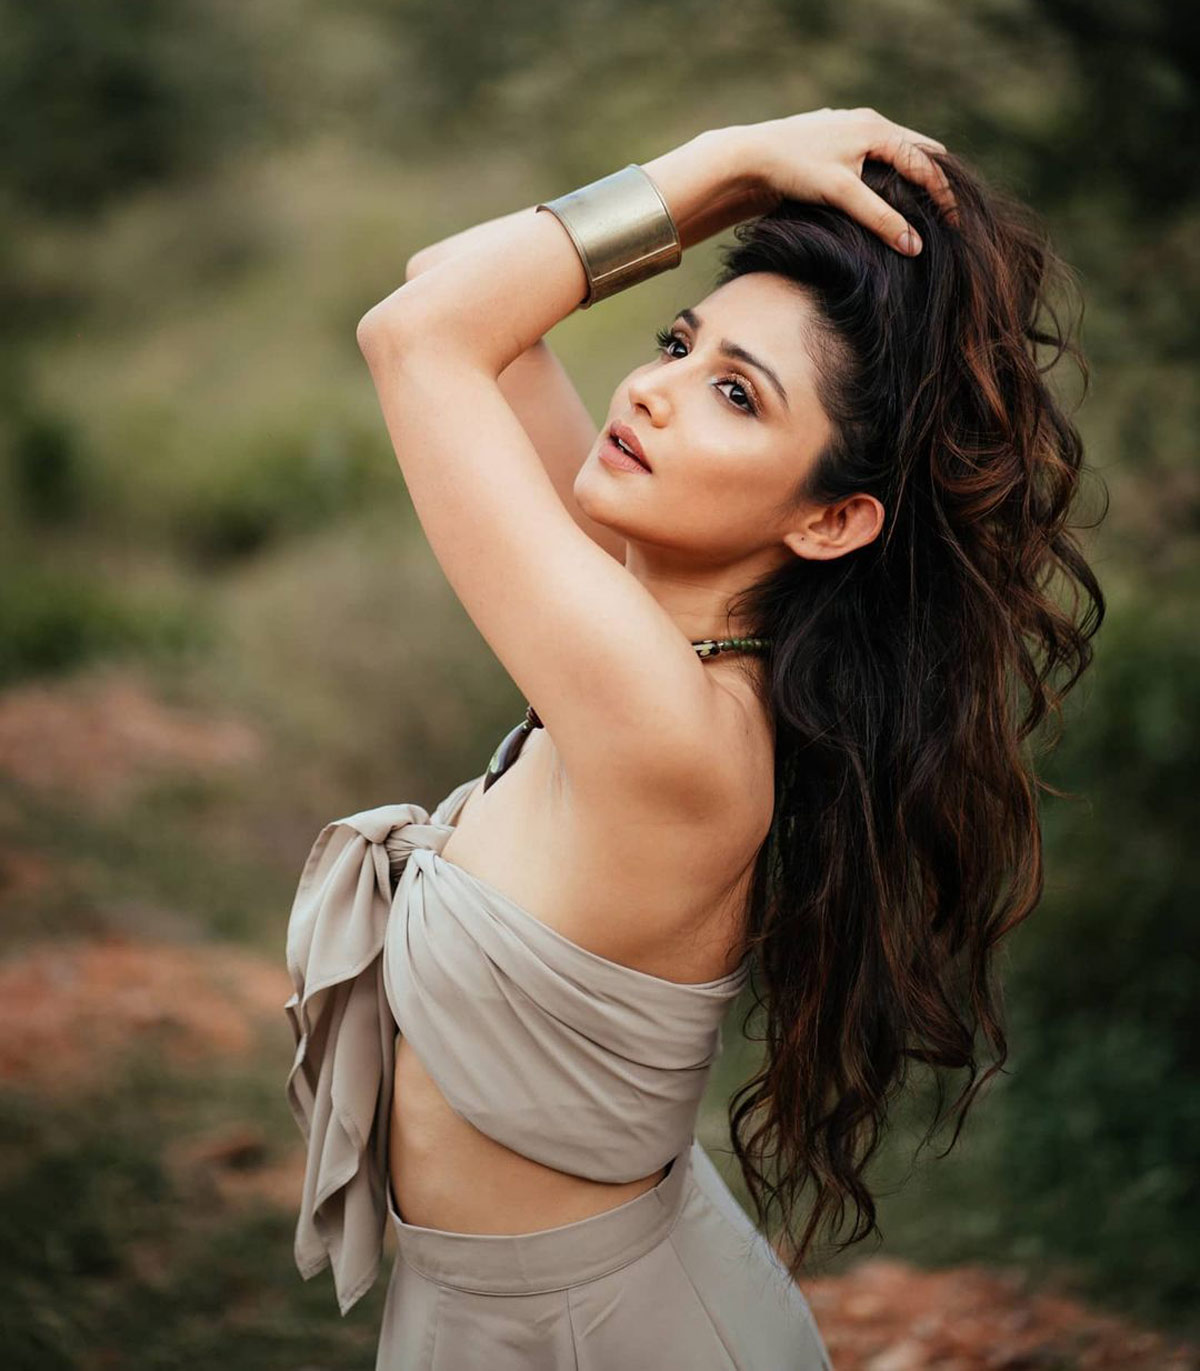 Donal Bisht Nude Naked Video - How Donal stays FIT and FABULOUS - Rediff.com